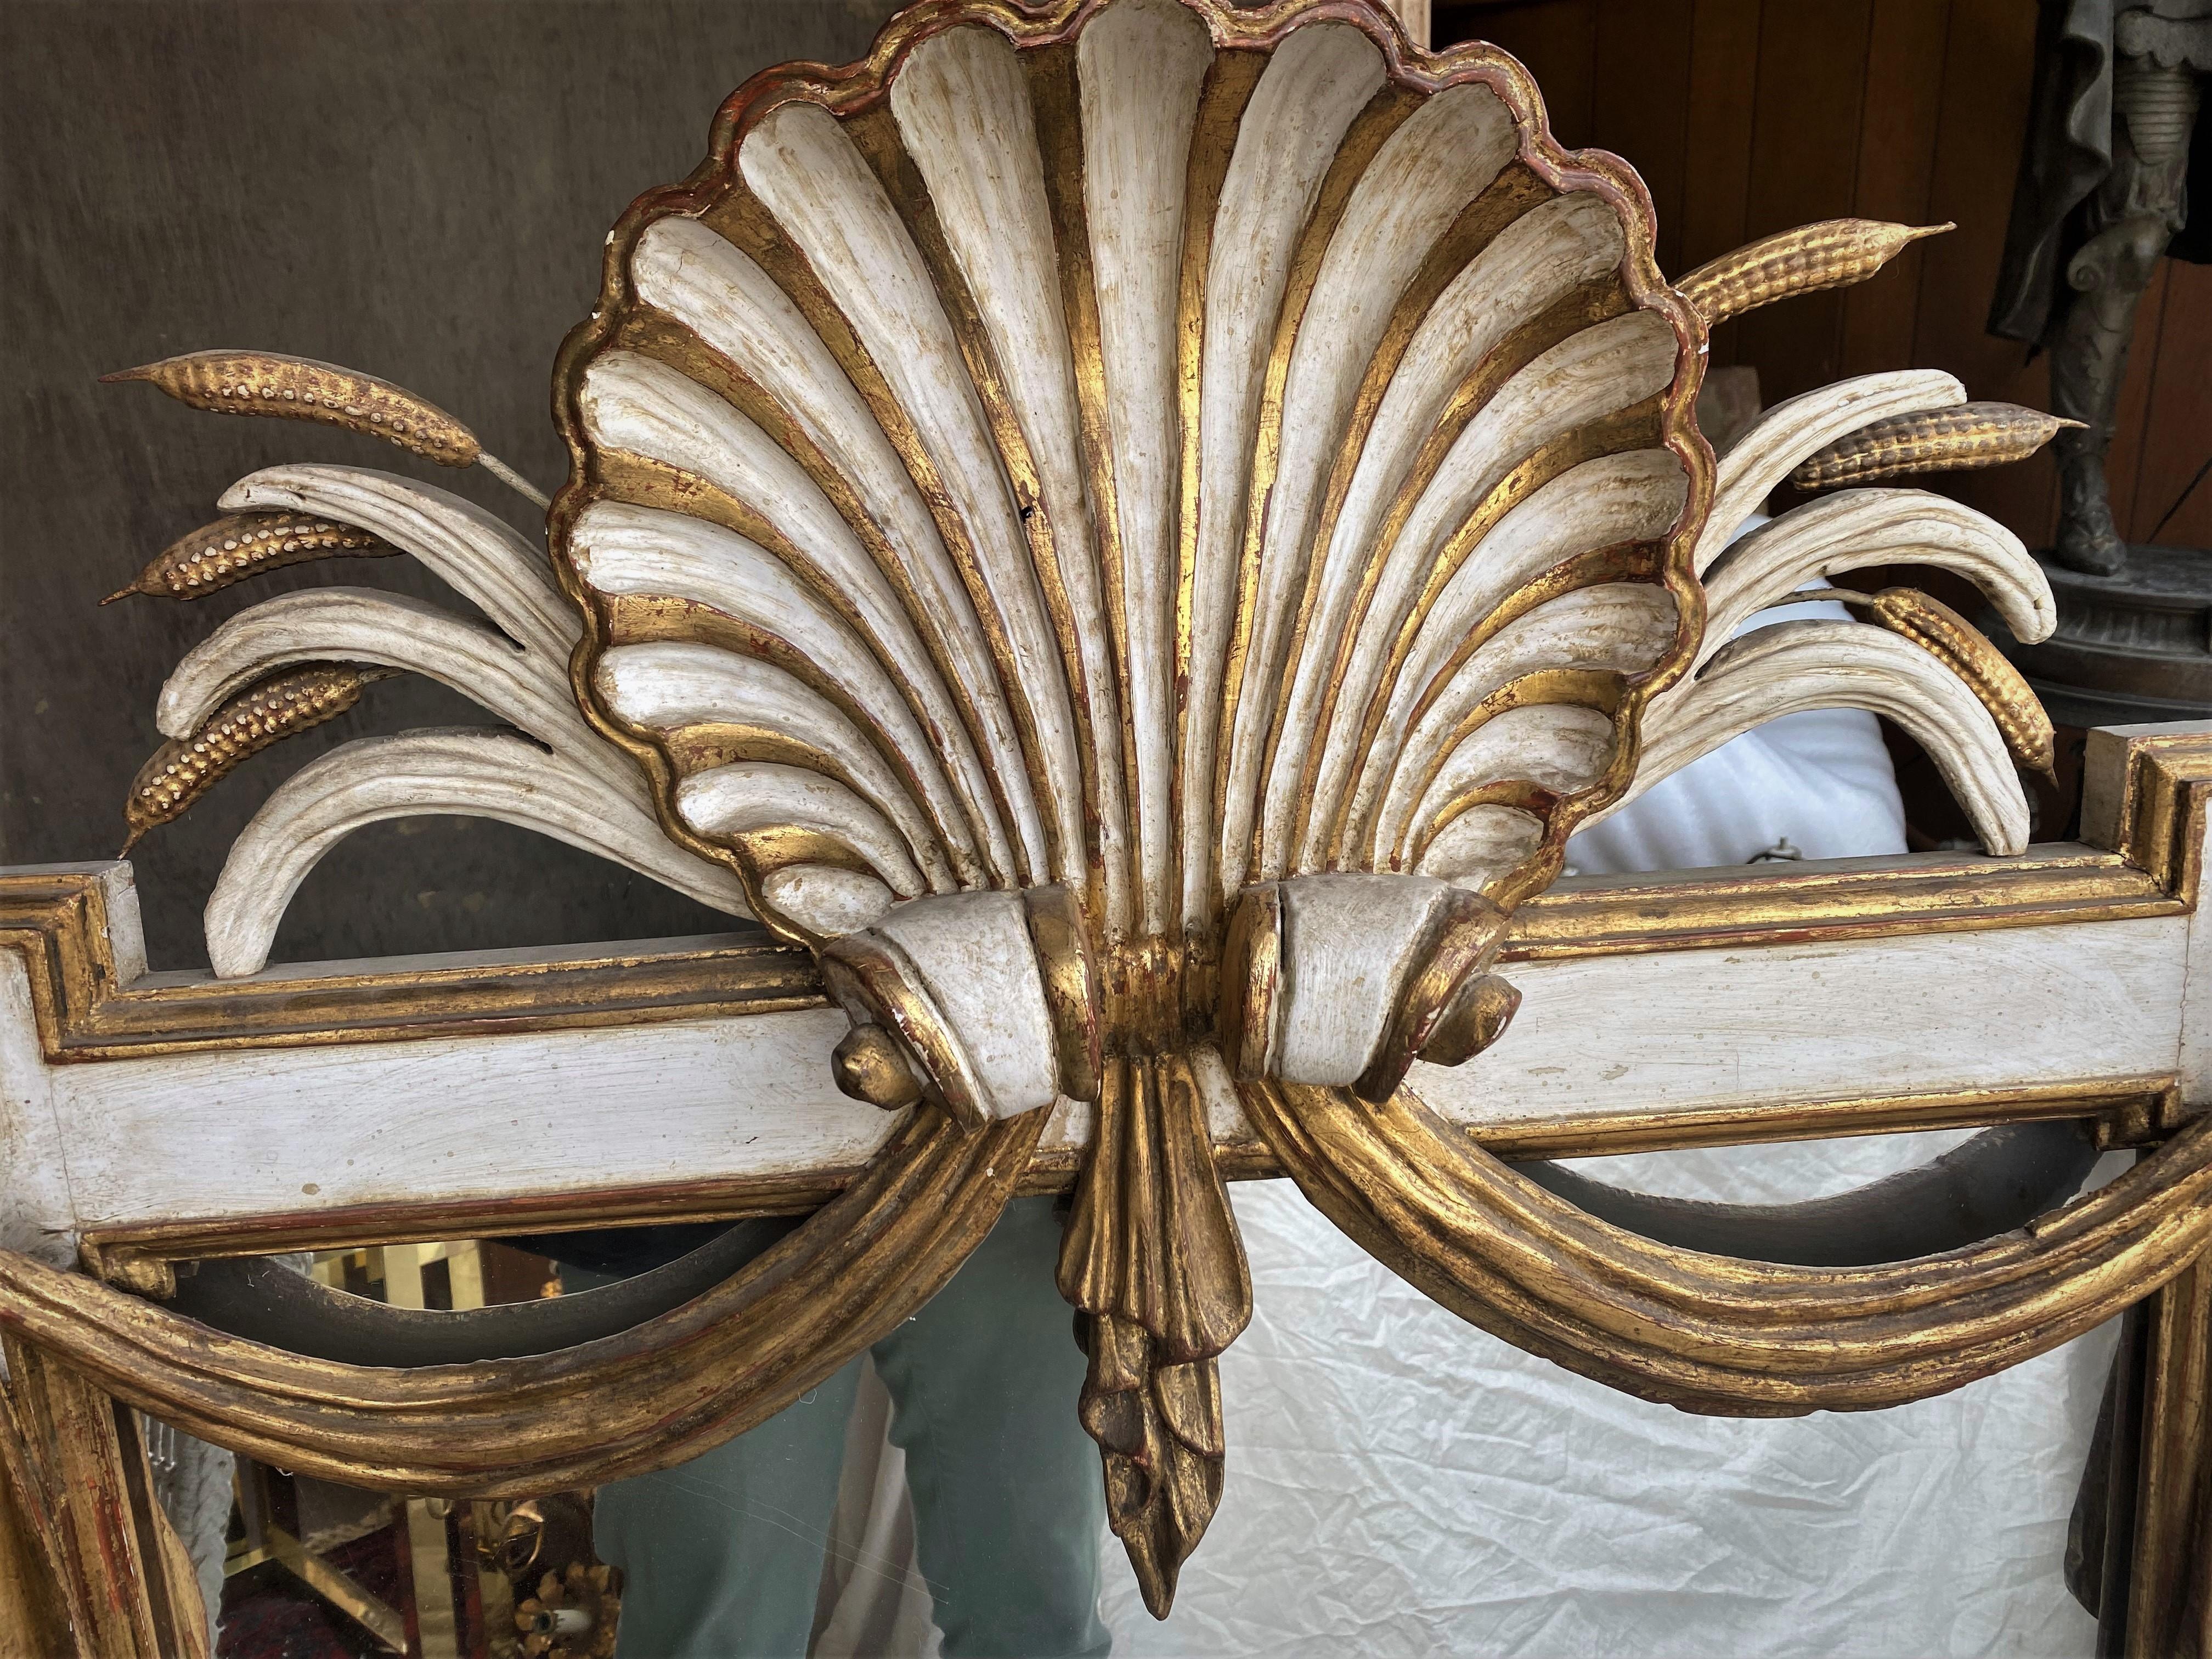 This is a fabulous Italian deeply carved large wood mirror with a prominent carved shell on the top center with sheaves of wheat spraying out to the sides and fabric gathered under the shell and draped in swags to the stars in the top two corners of